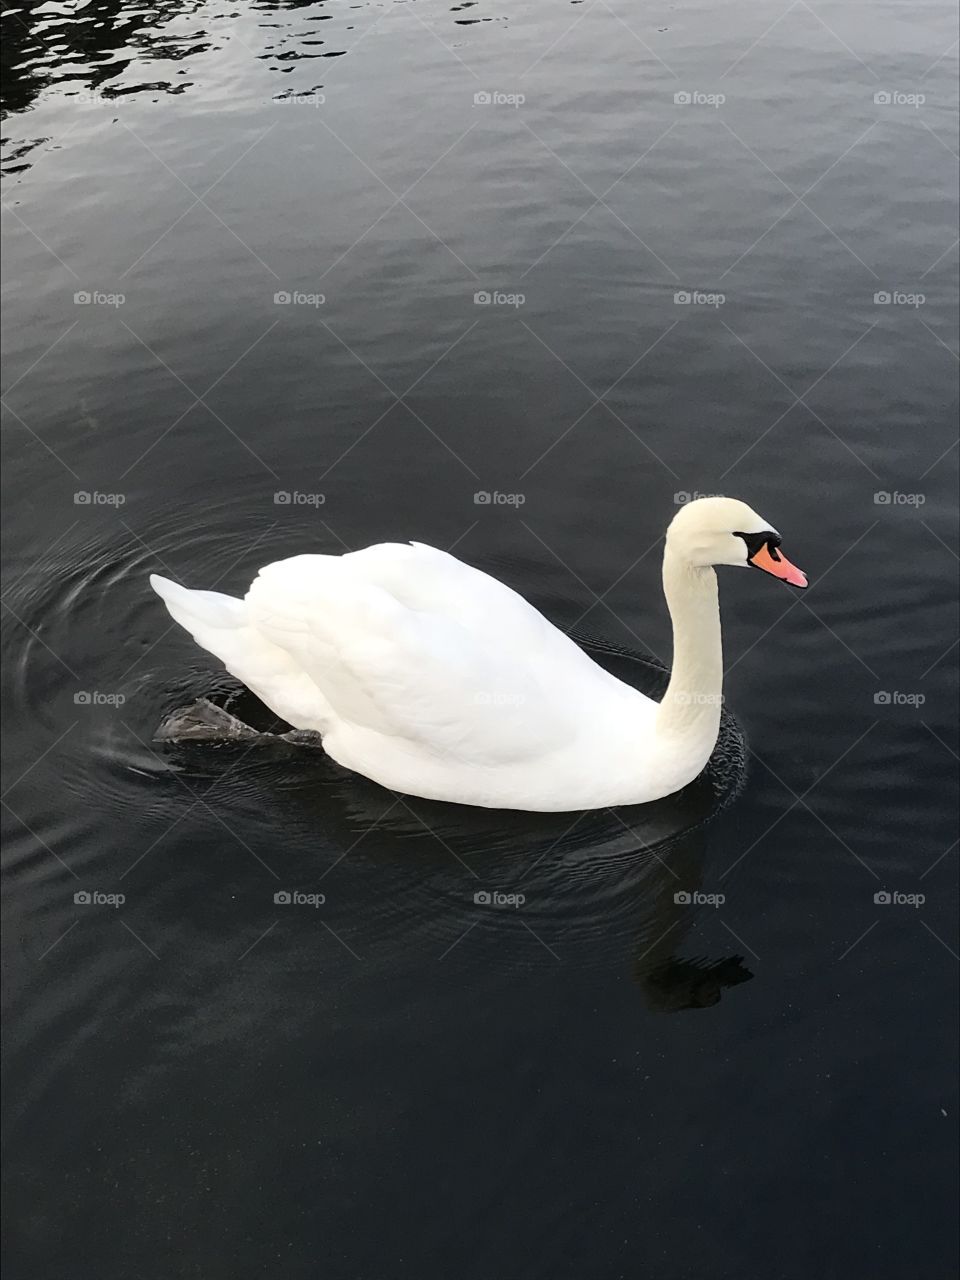 Swan swimming on the ocean. It’s white with a orange, long neb. The ocean is calm. Taken on a winter day in February. This is in Norway.